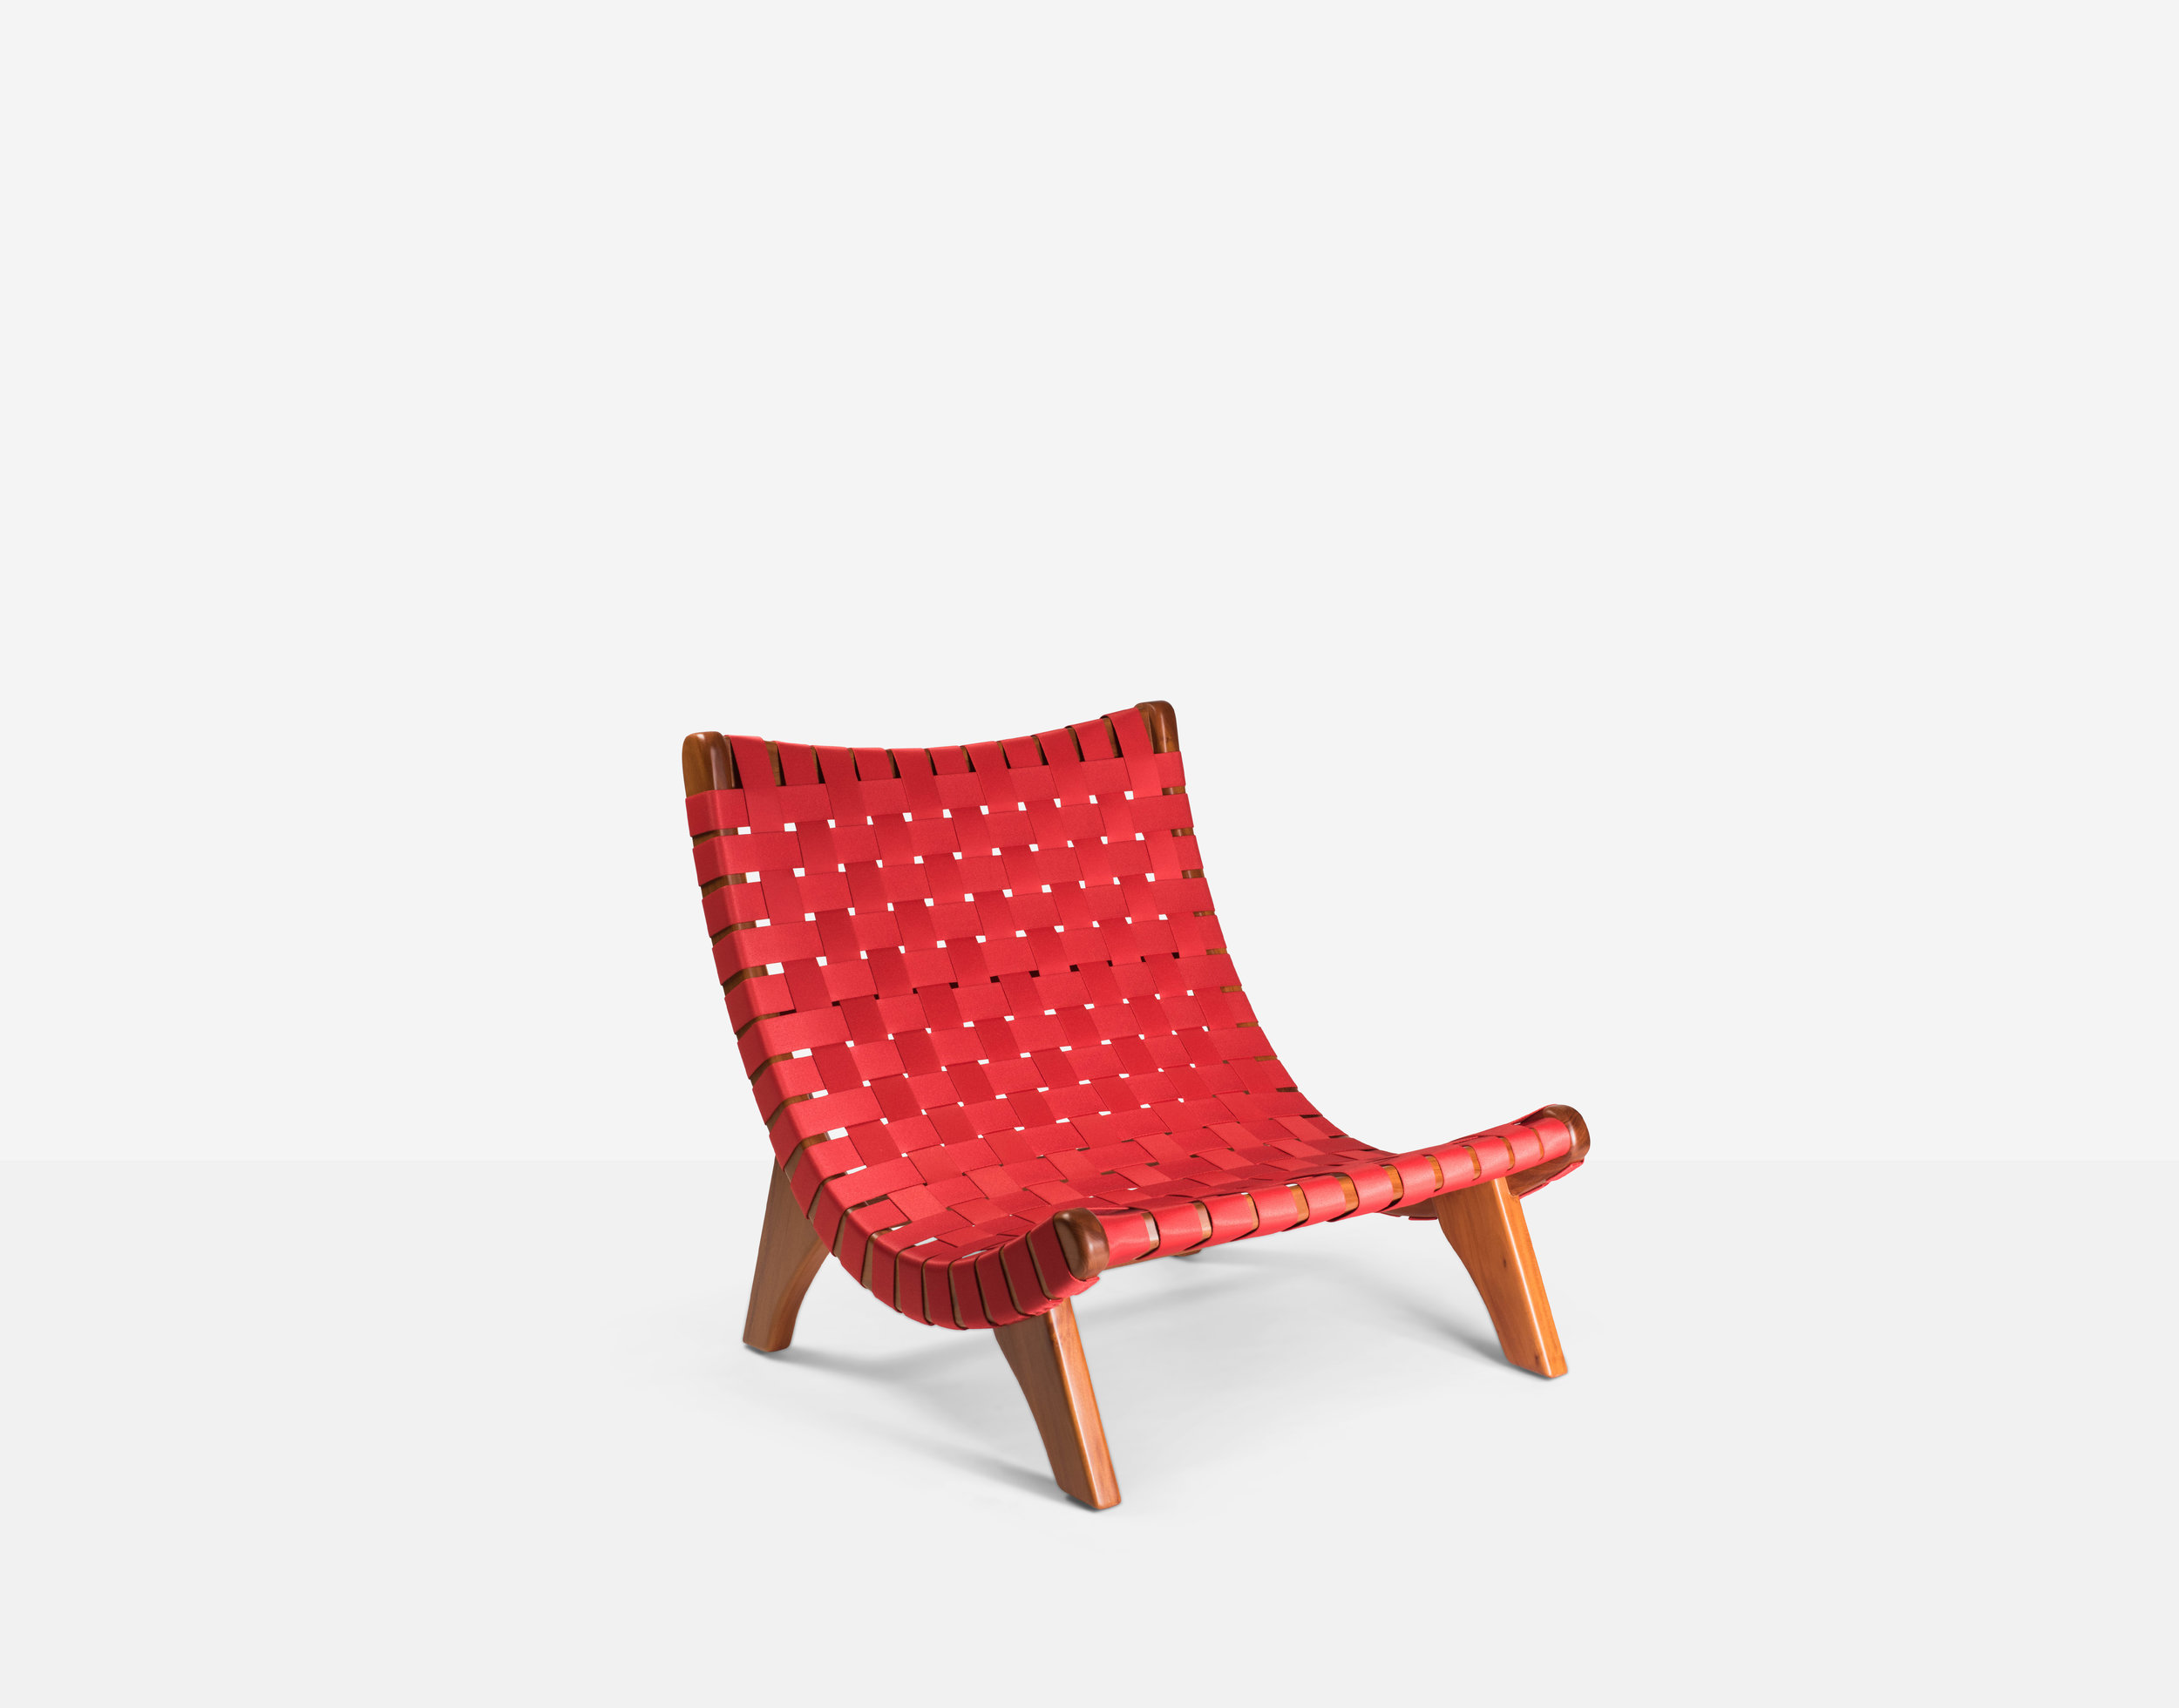 Luteca_MvB_San Miguel-Lounge Chair_Red-Strapping_Mahogany_FP-W.jpg